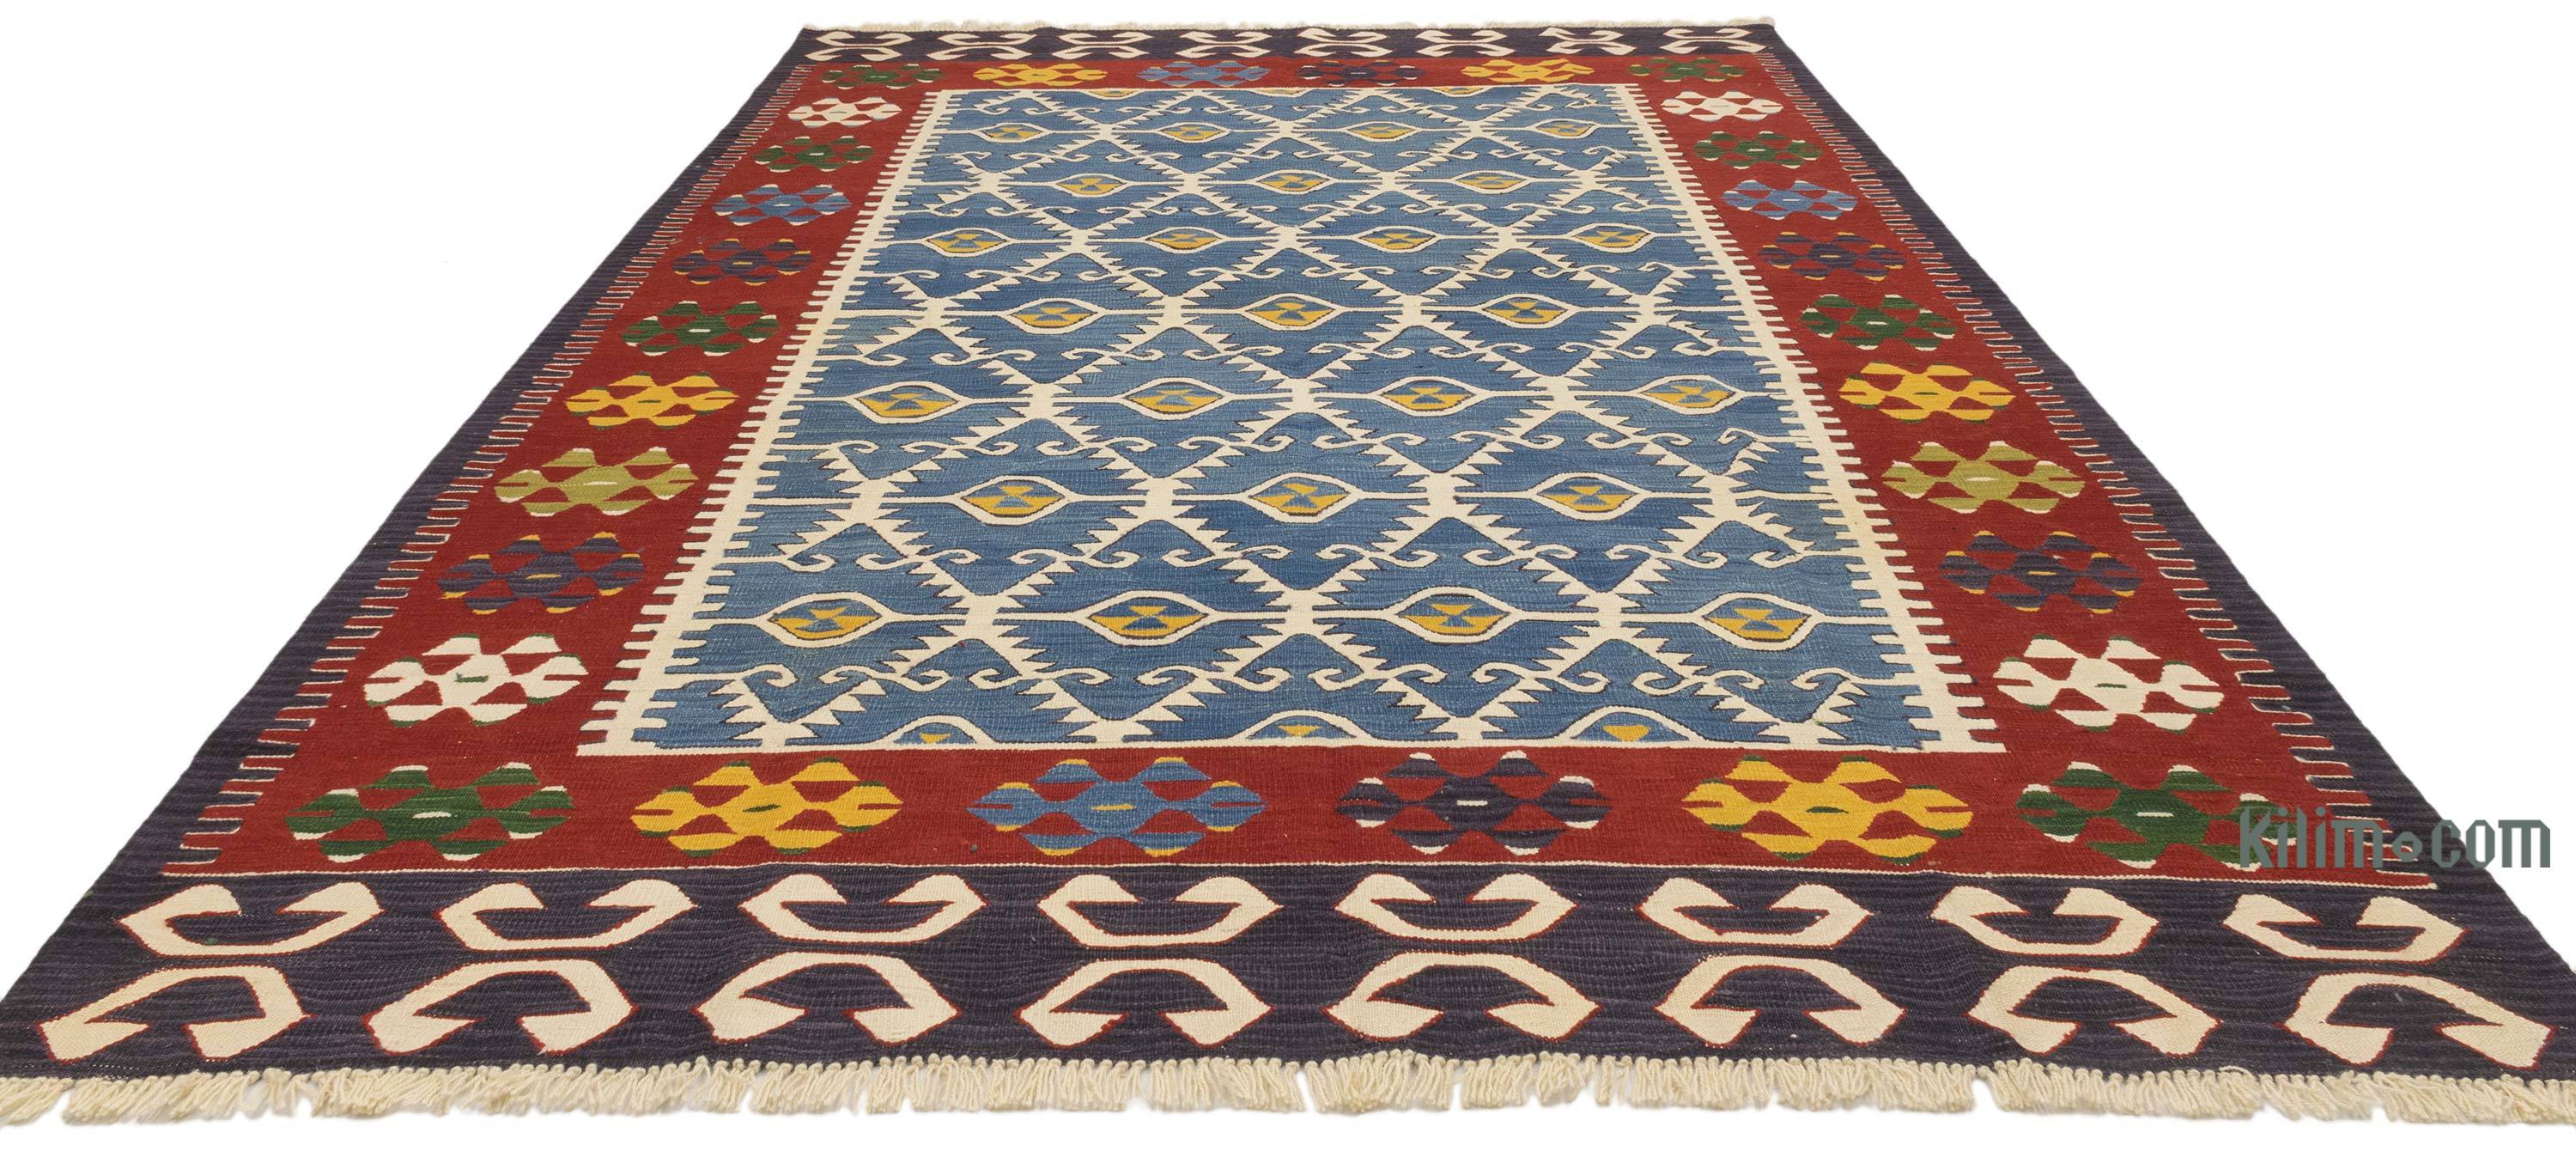 K0062696 Vintage Turkish Hand-Knotted Rug - 2' 4 x 3' 5 (28 x 41)  The  Source for Vintage Rugs, Tribal Kilim Rugs, Wool Turkish Rugs, Overdyed  Persian Rugs, Runner Rugs, Patchwork